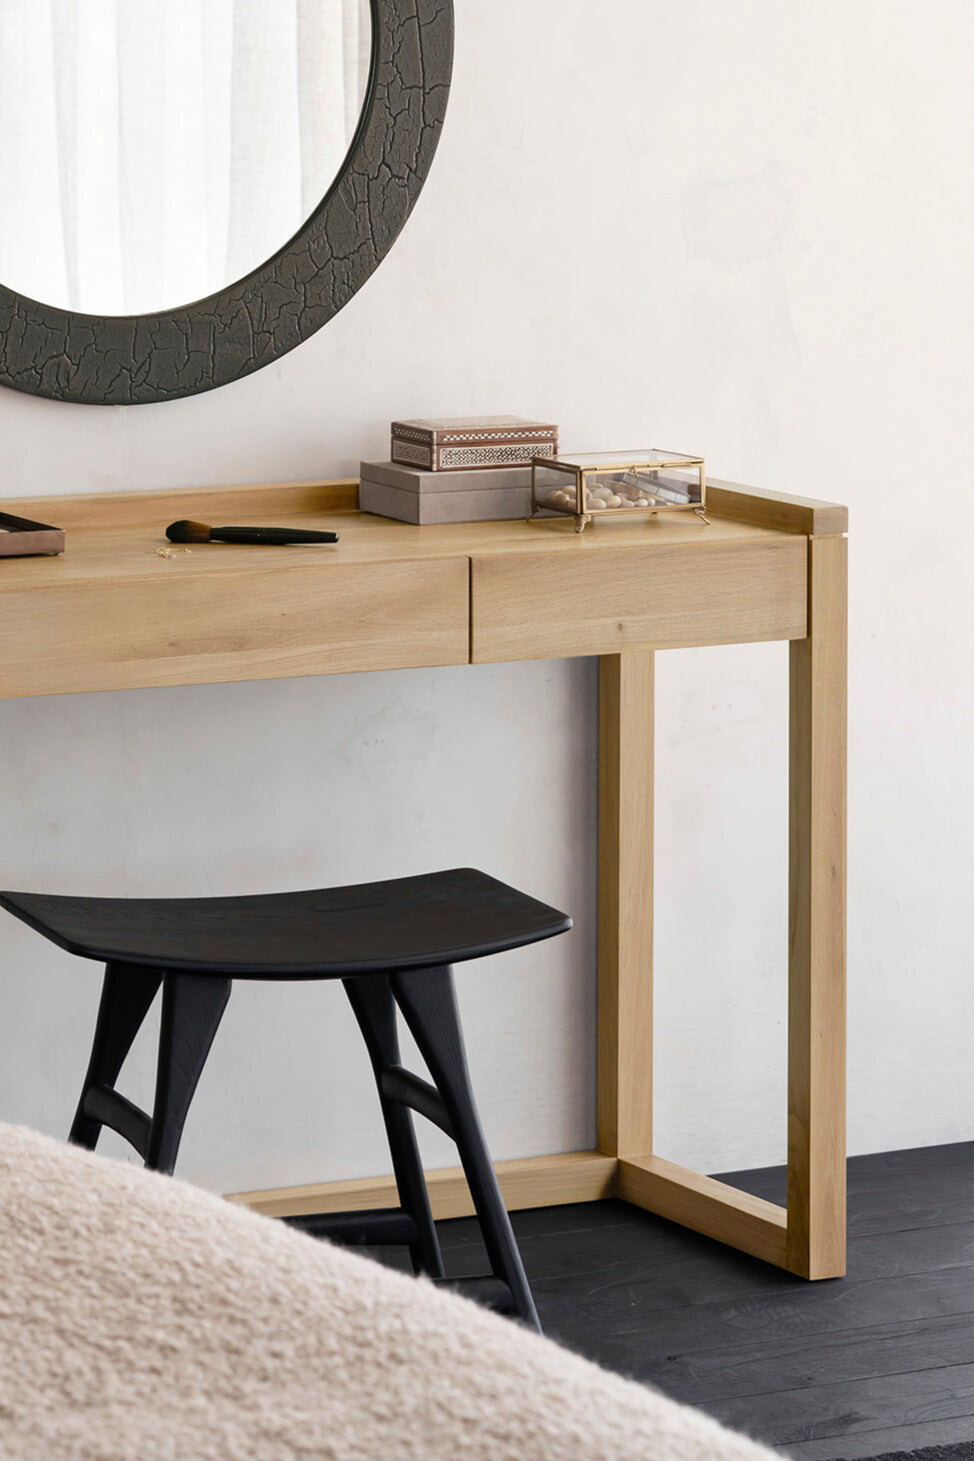 The Frame Desk from Ethnicraft with a black stool and a mirror above